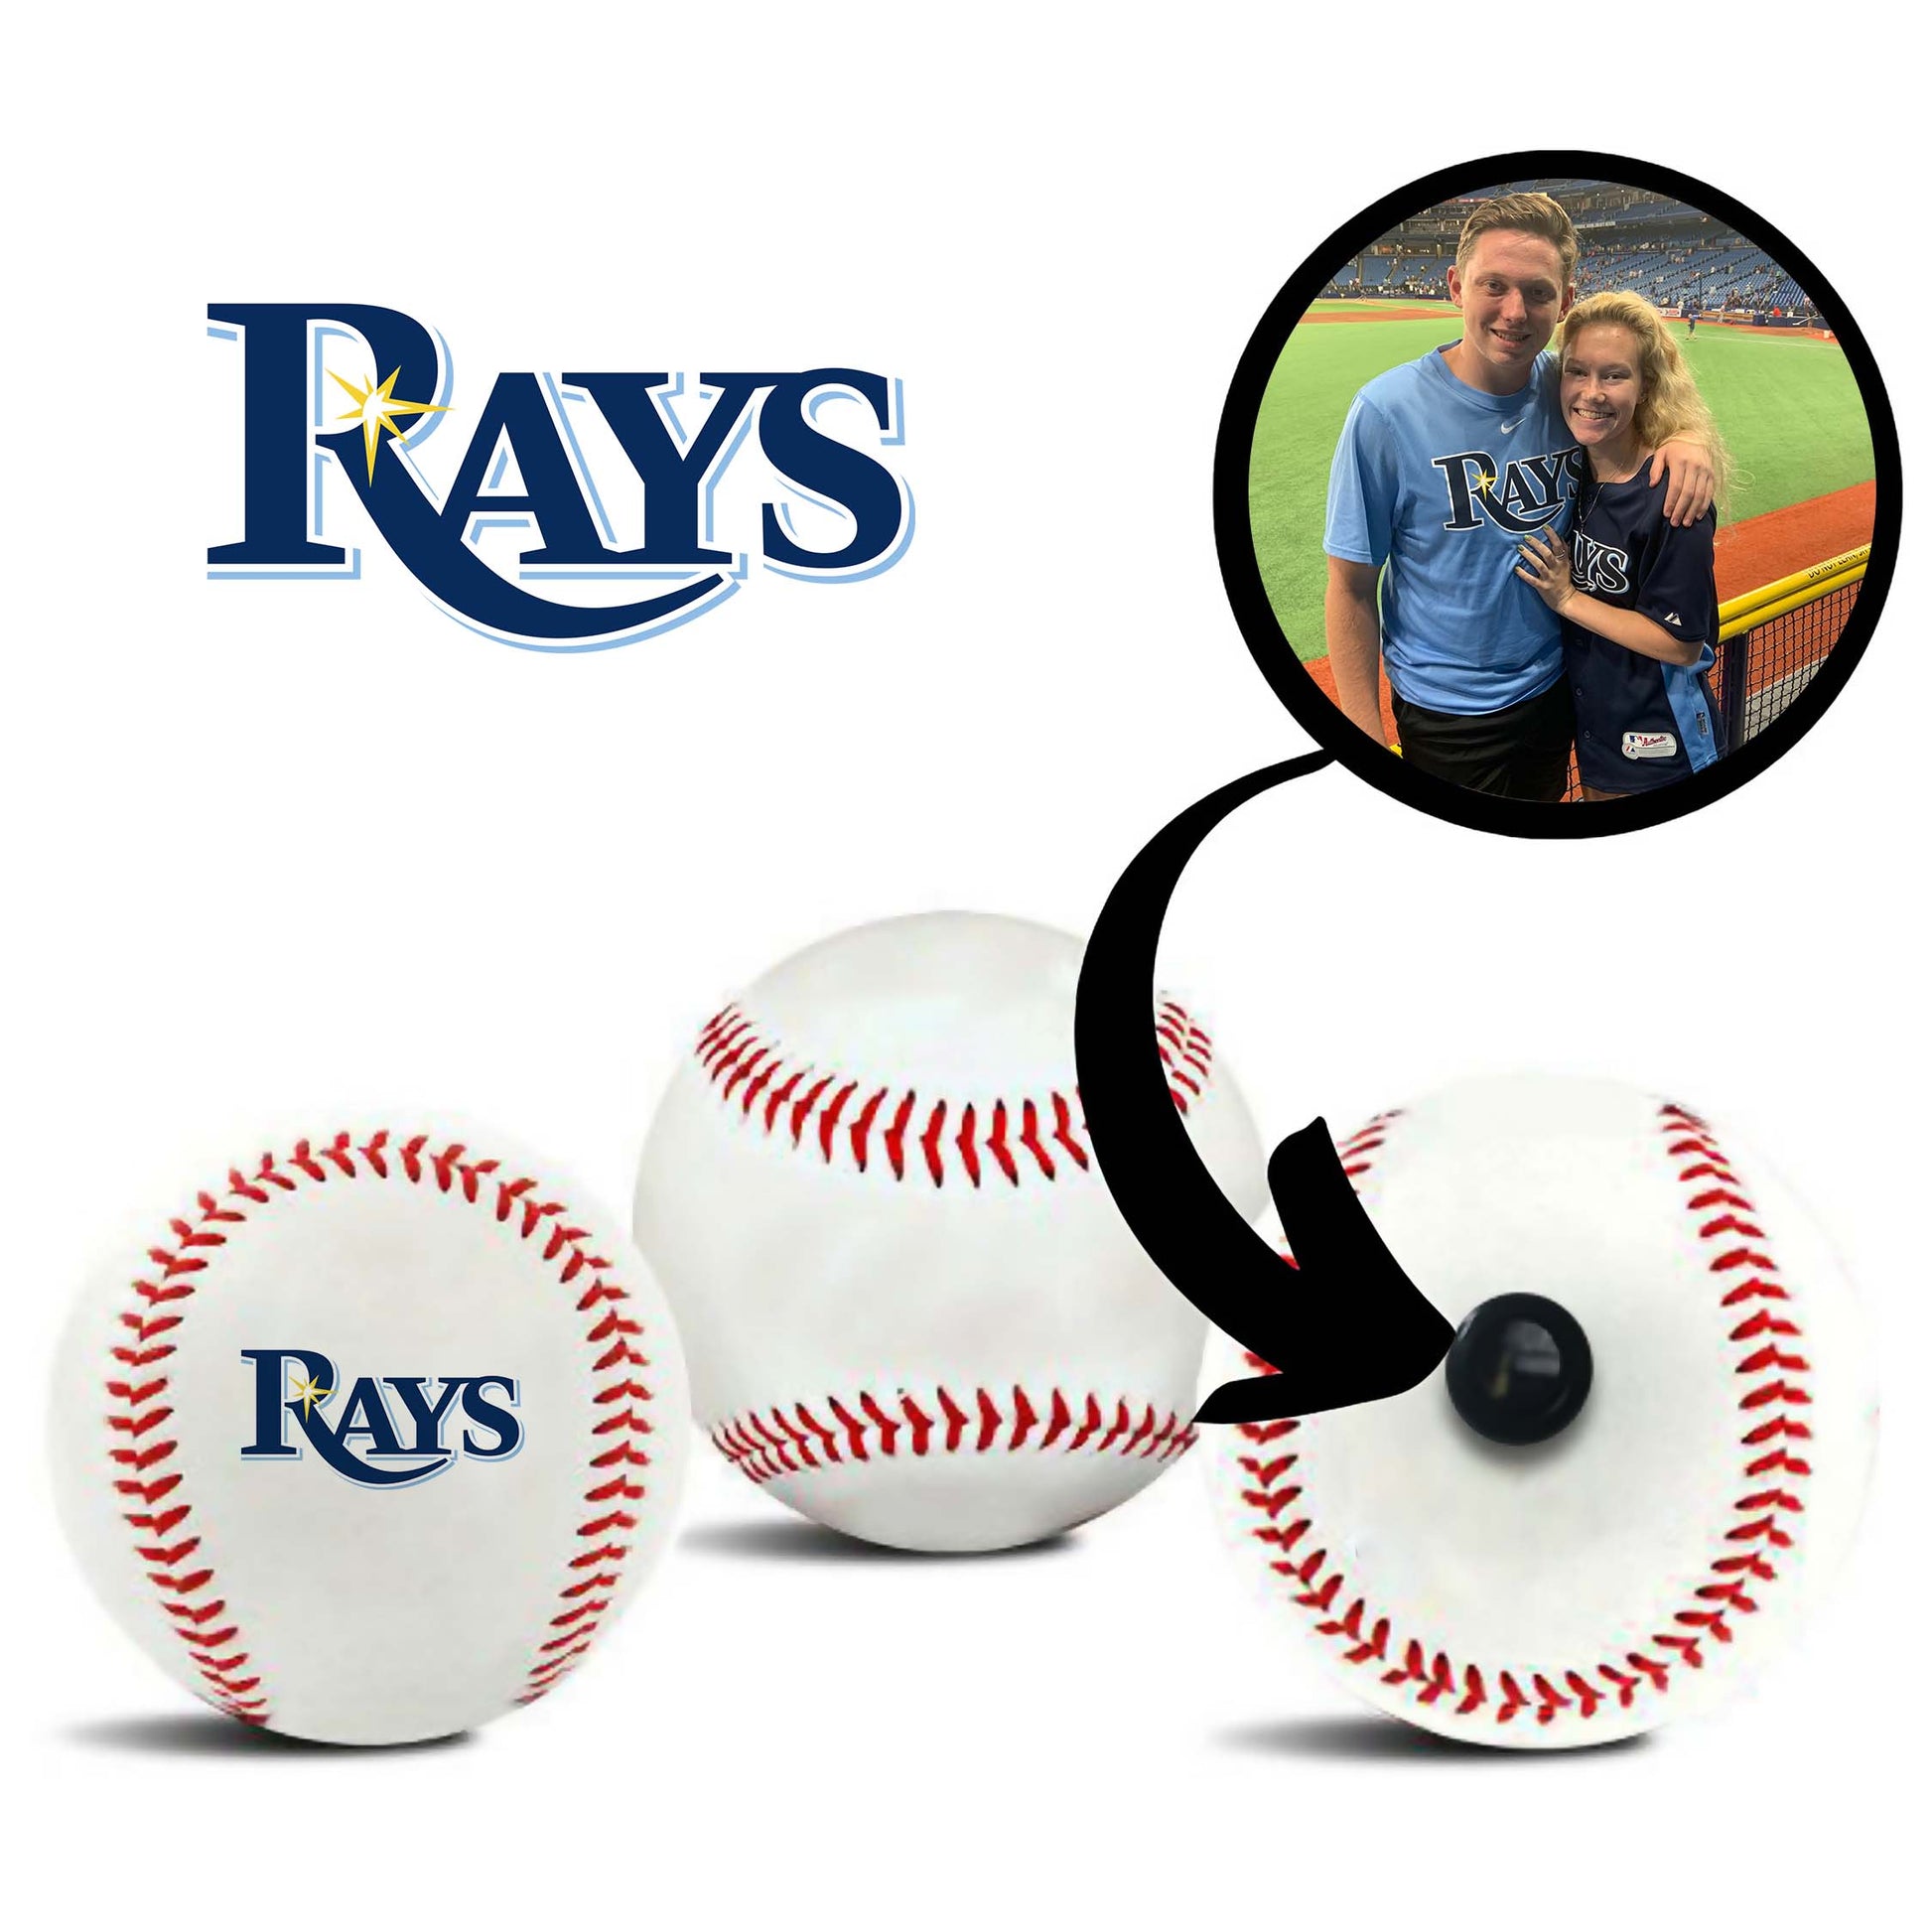 tampa bay rays official store